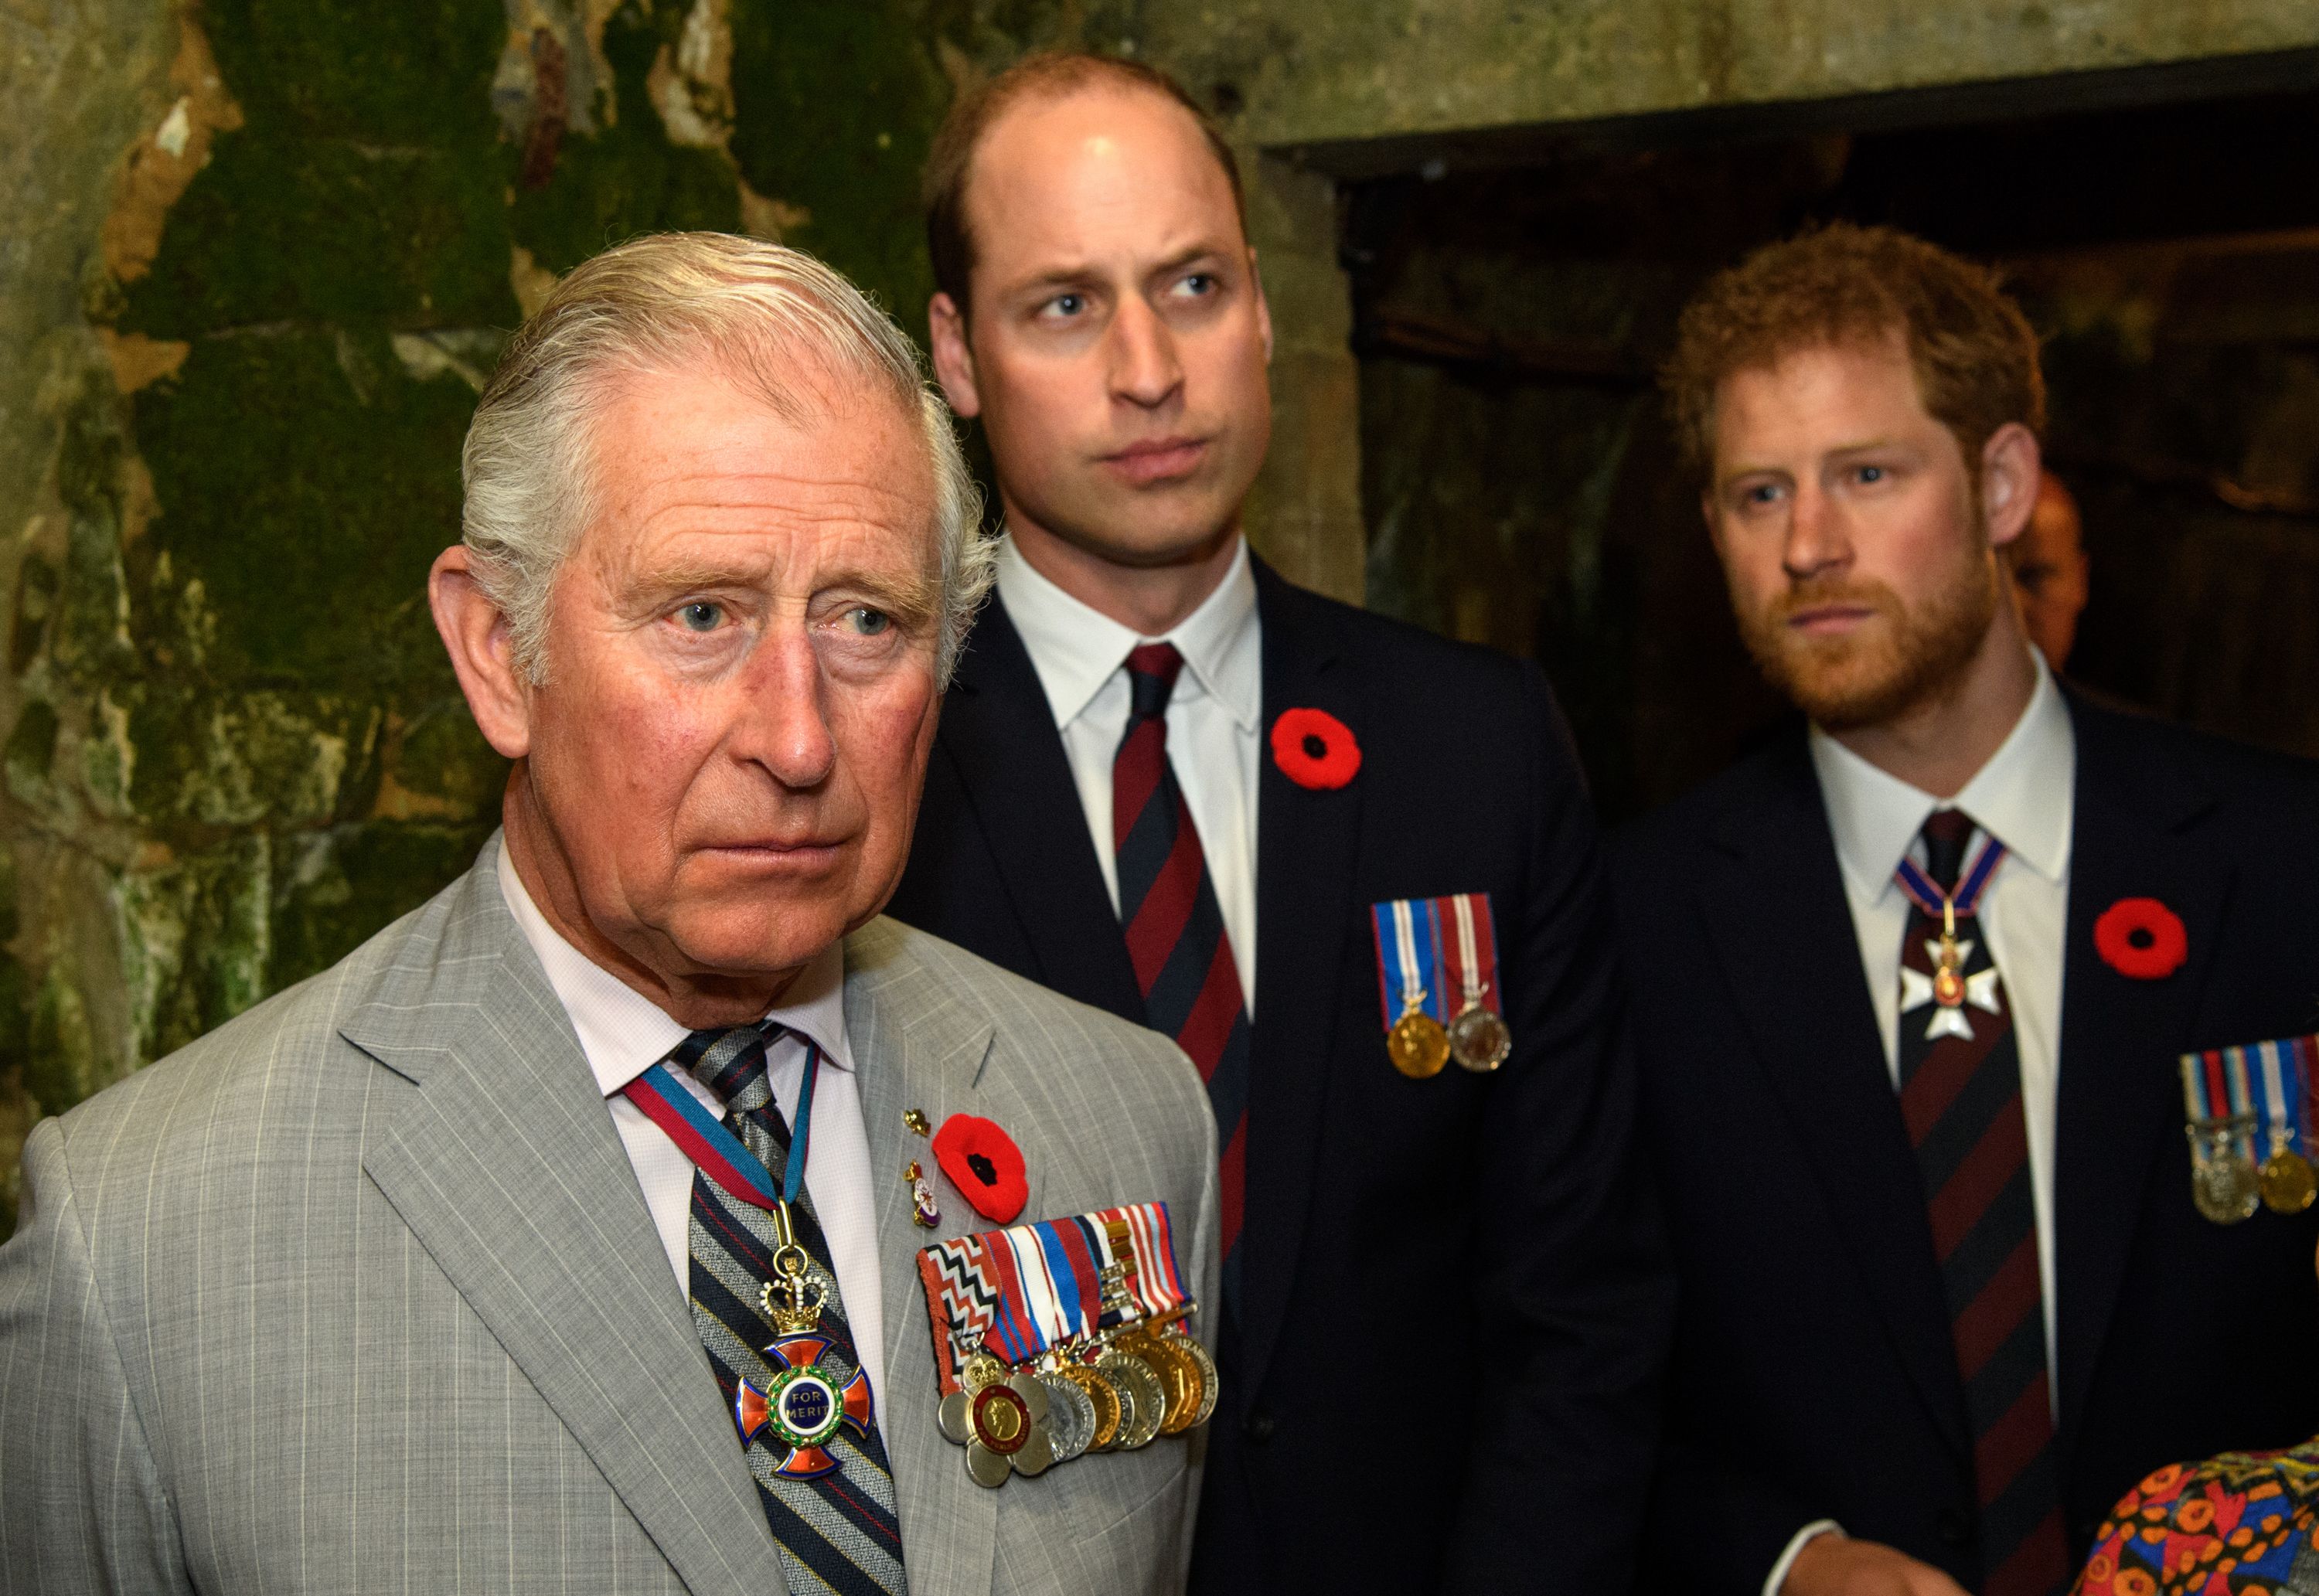 Charles, Prince of Wales, Prince William, and Prince Harry at the 100th anniversary of the battle of Vimy Ridge in 2017 in Lille, France | Source: Getty Images